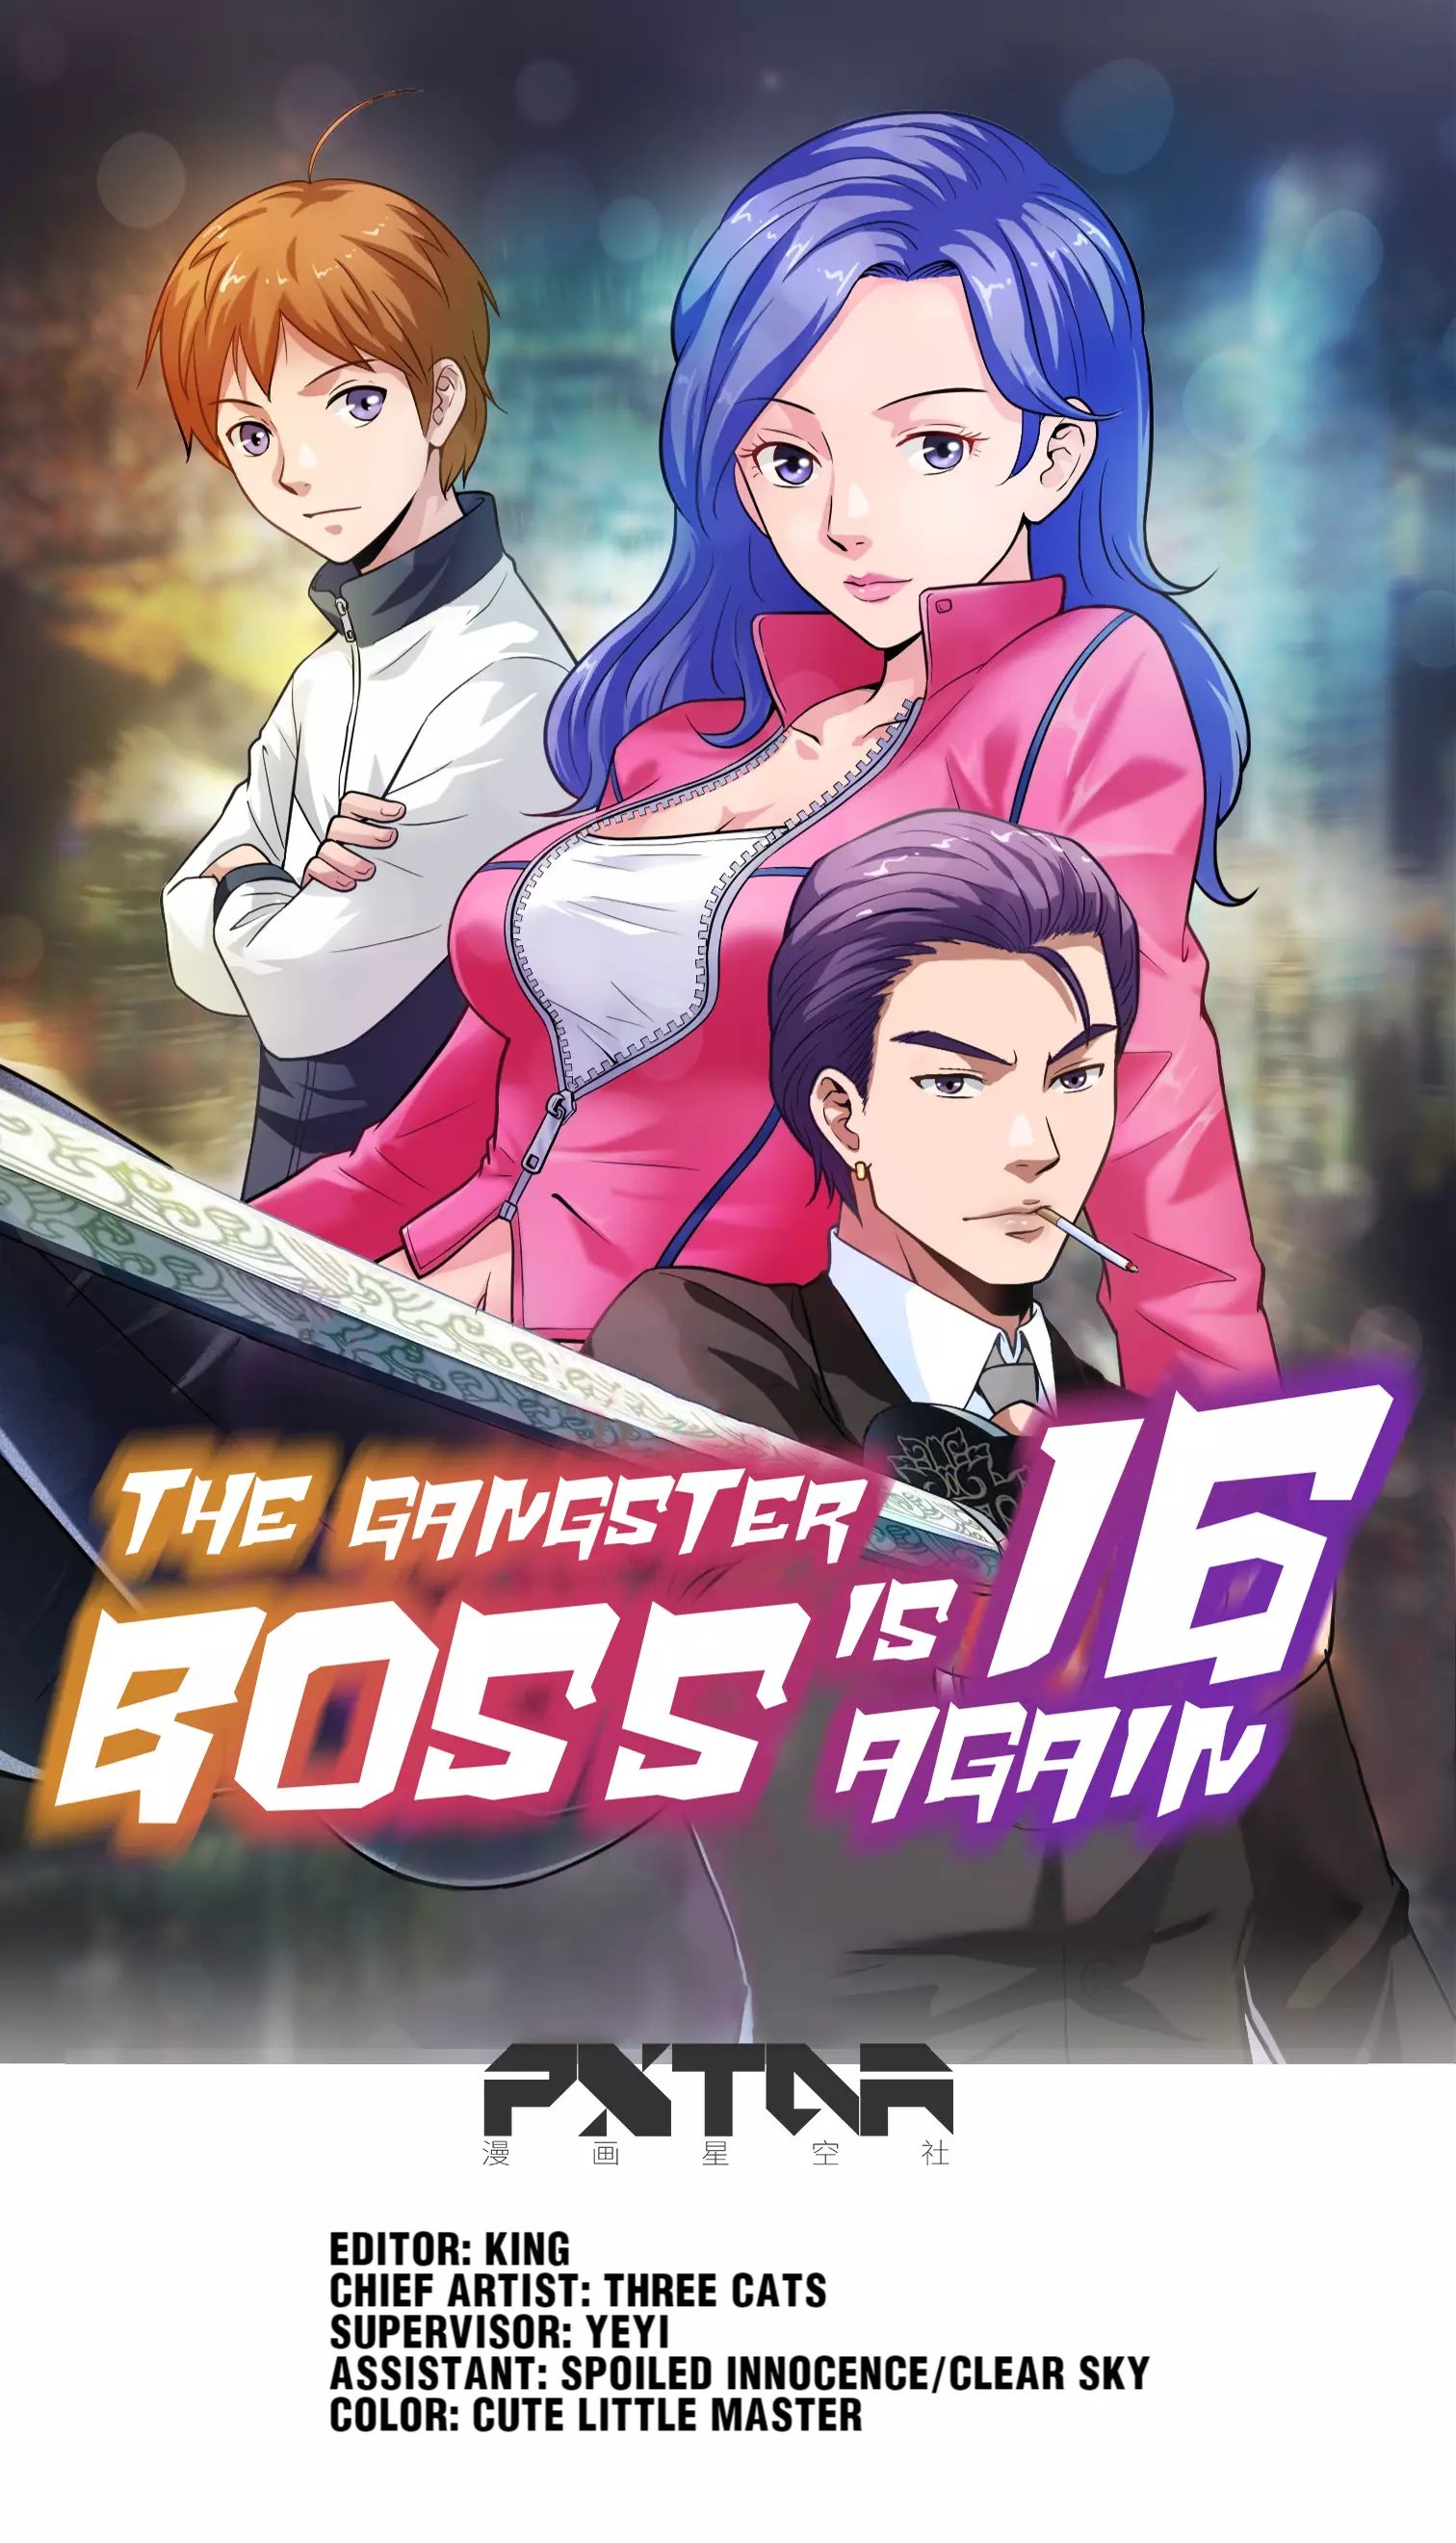 The Gangster Boss Is 16 Again - 30 page 1-9a9ca659